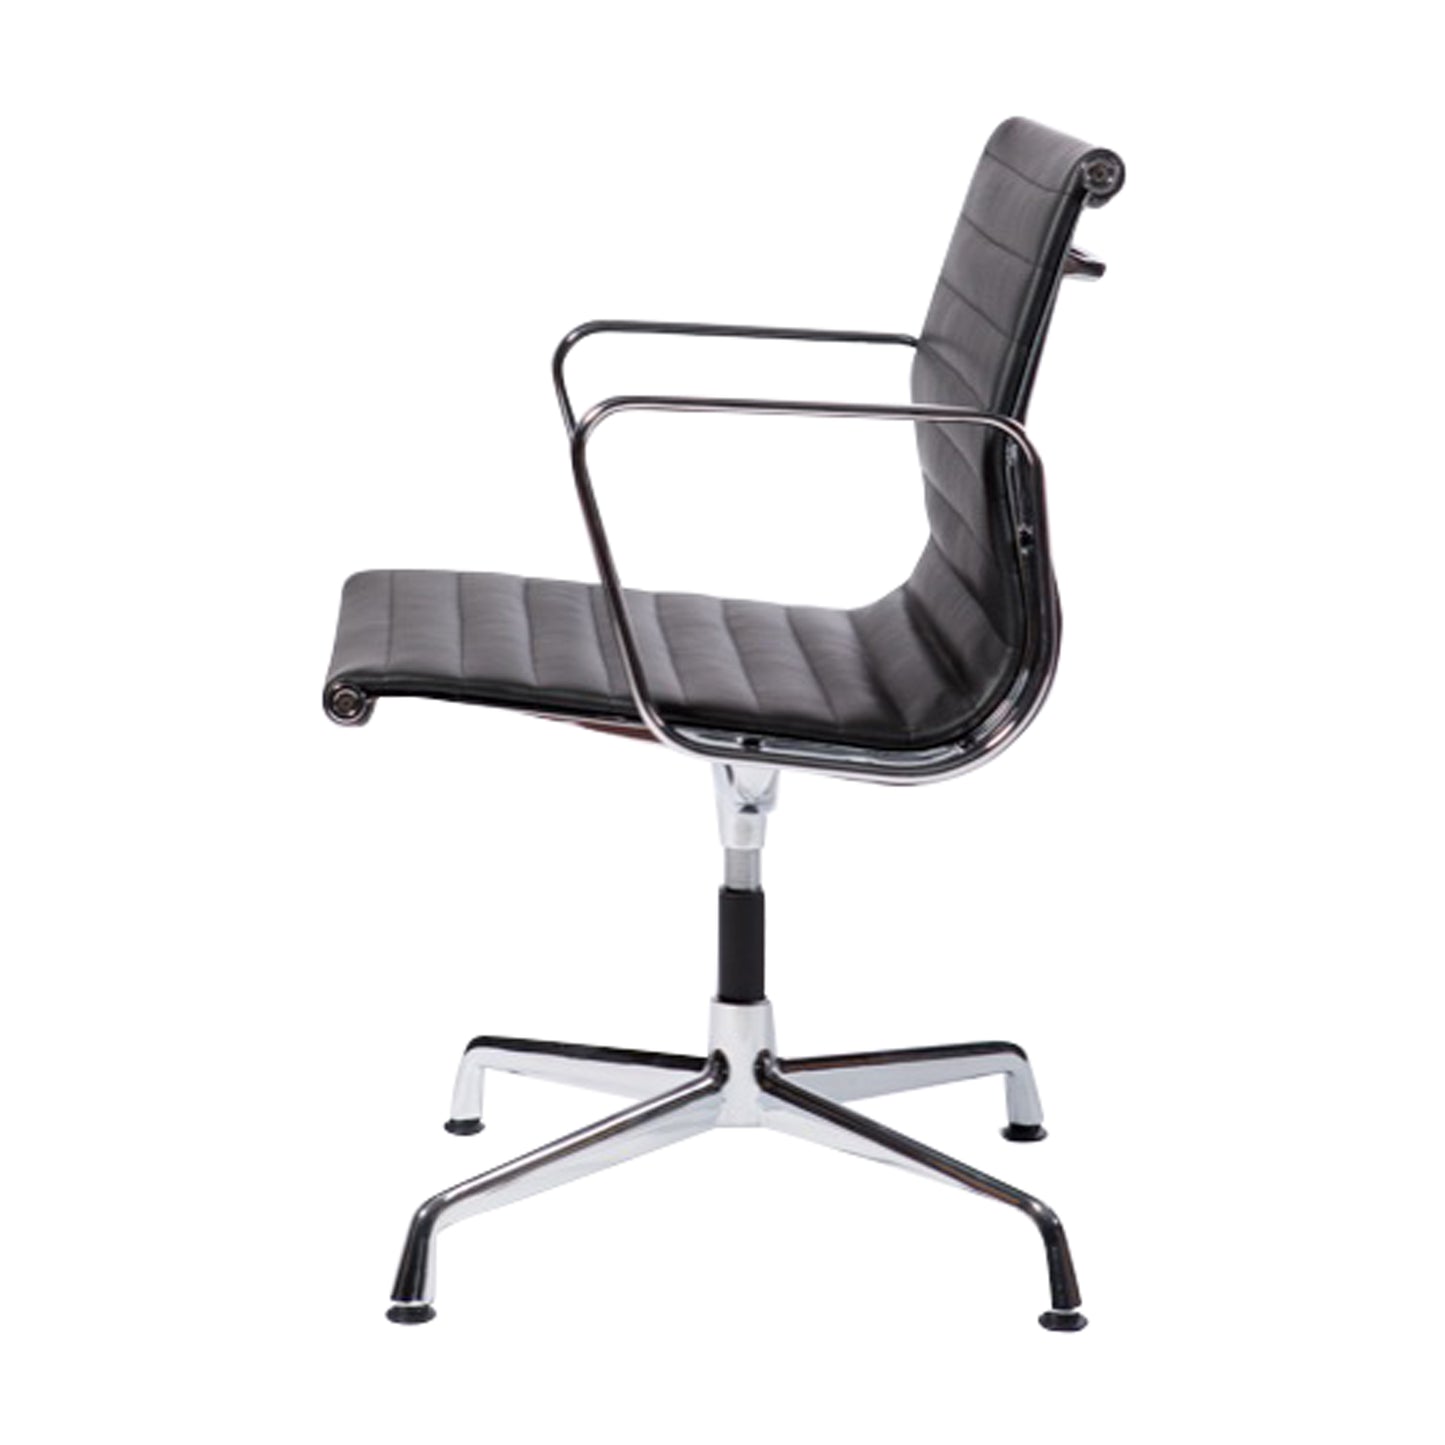 Chair without wheels aluminium style | Black Leather | Side